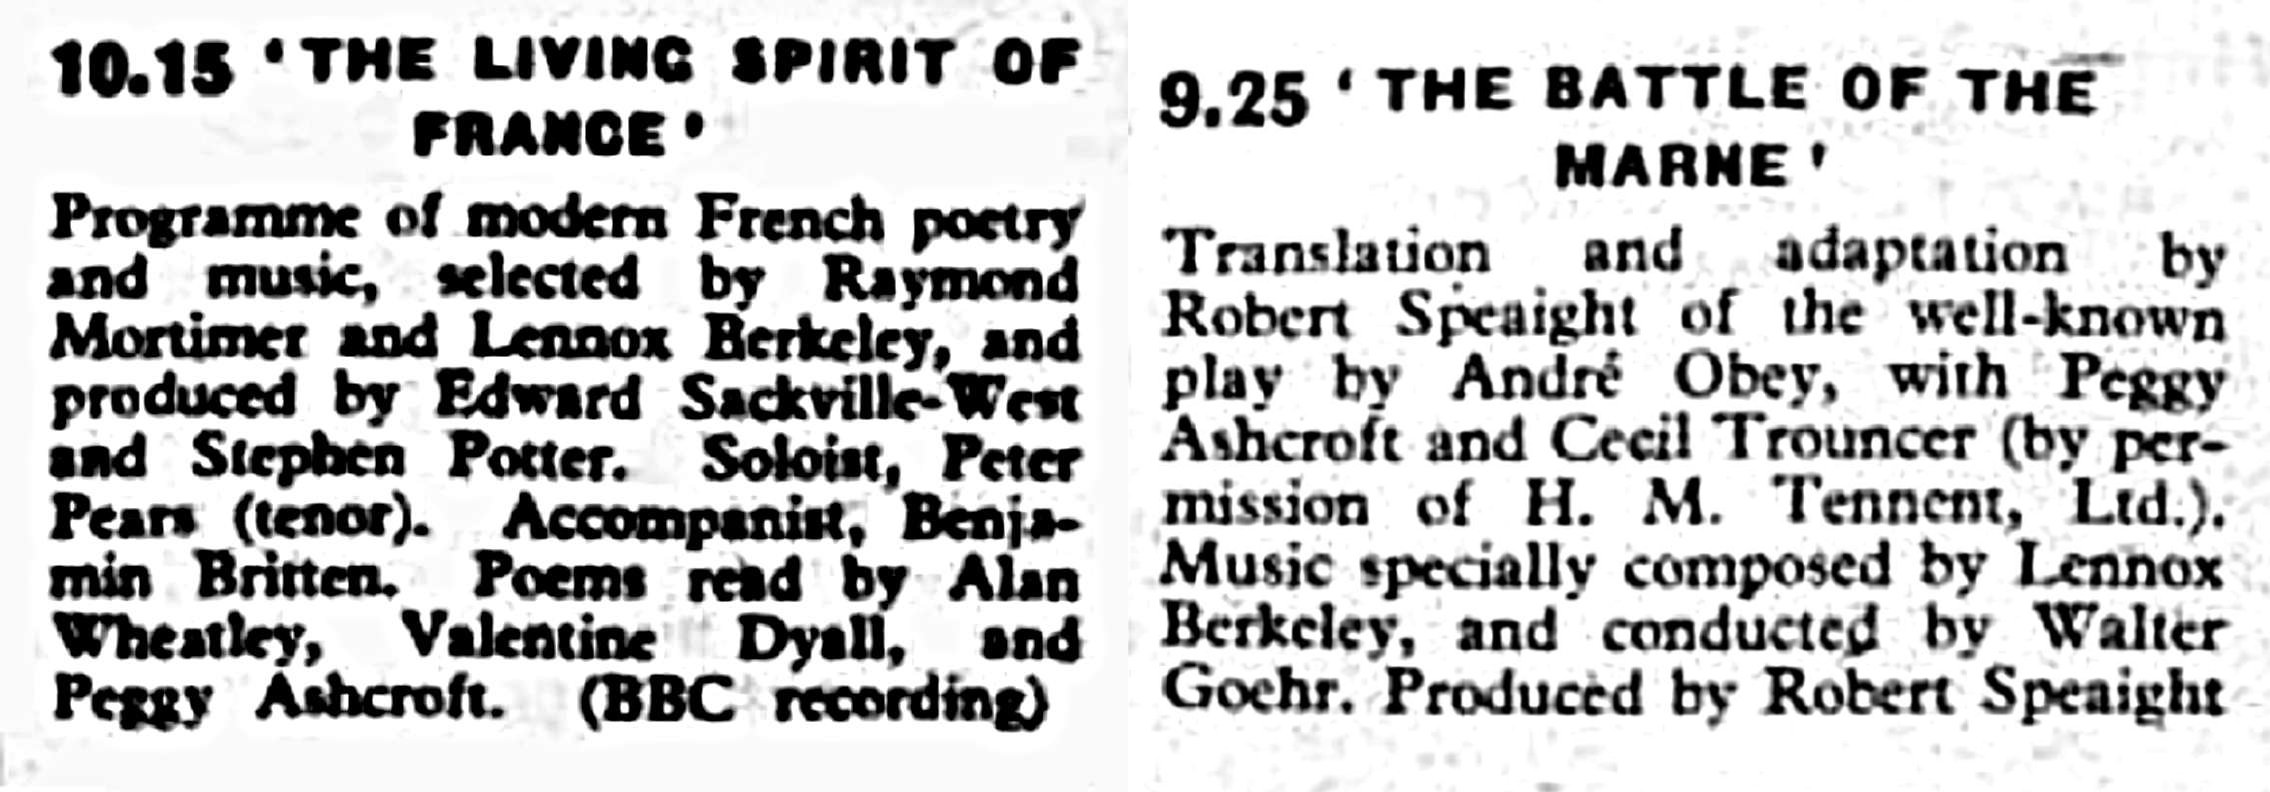 Radio Times listings of BBC Home Service broadcasts on 30 August 1943 (left) and 6 September 1943